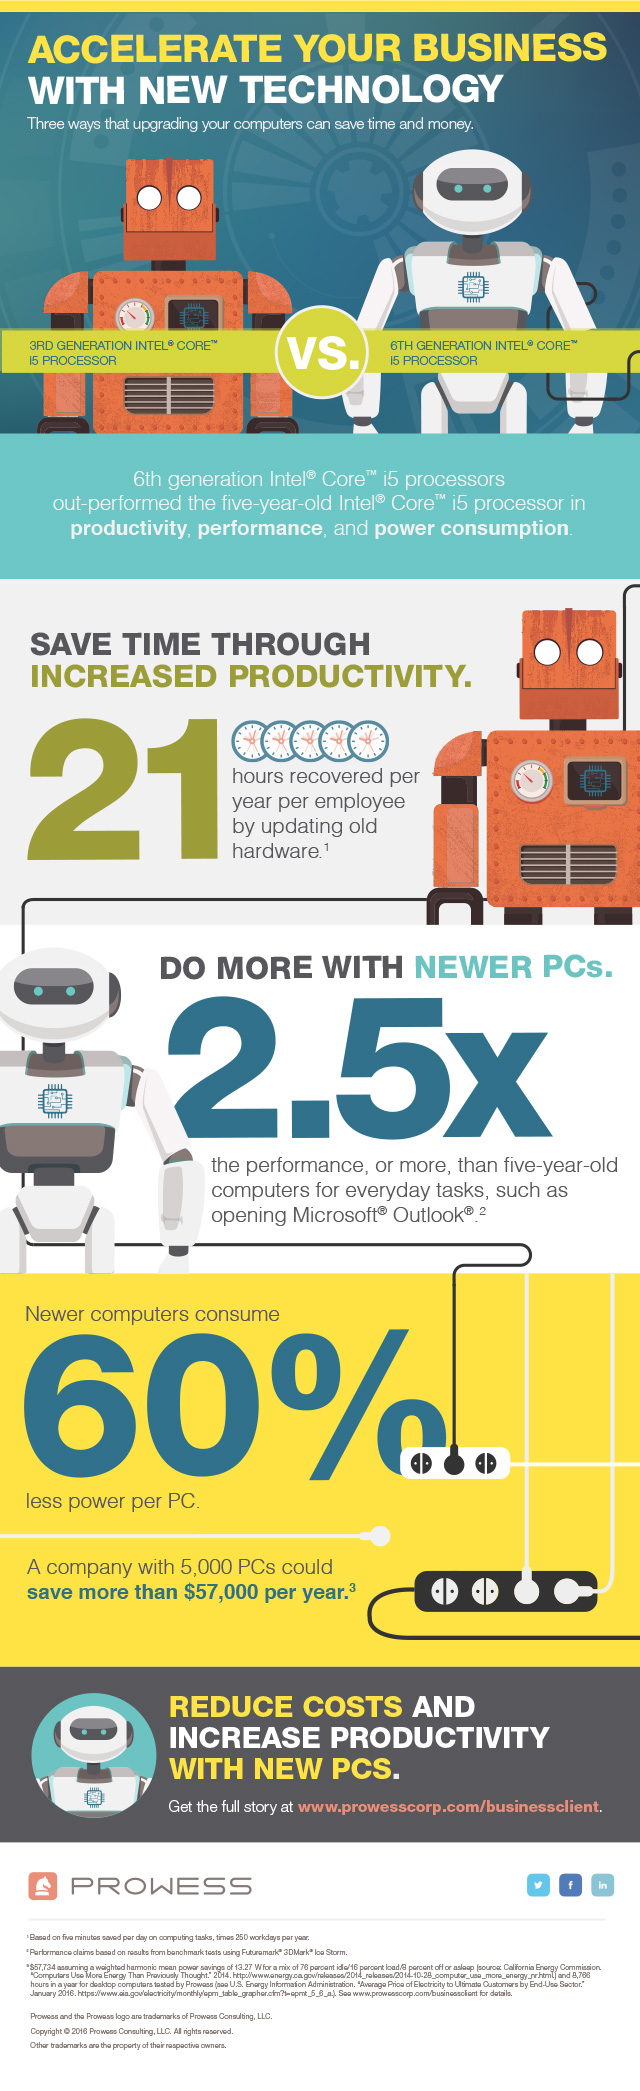 Prowess_Intel_Business_Client_Infographic